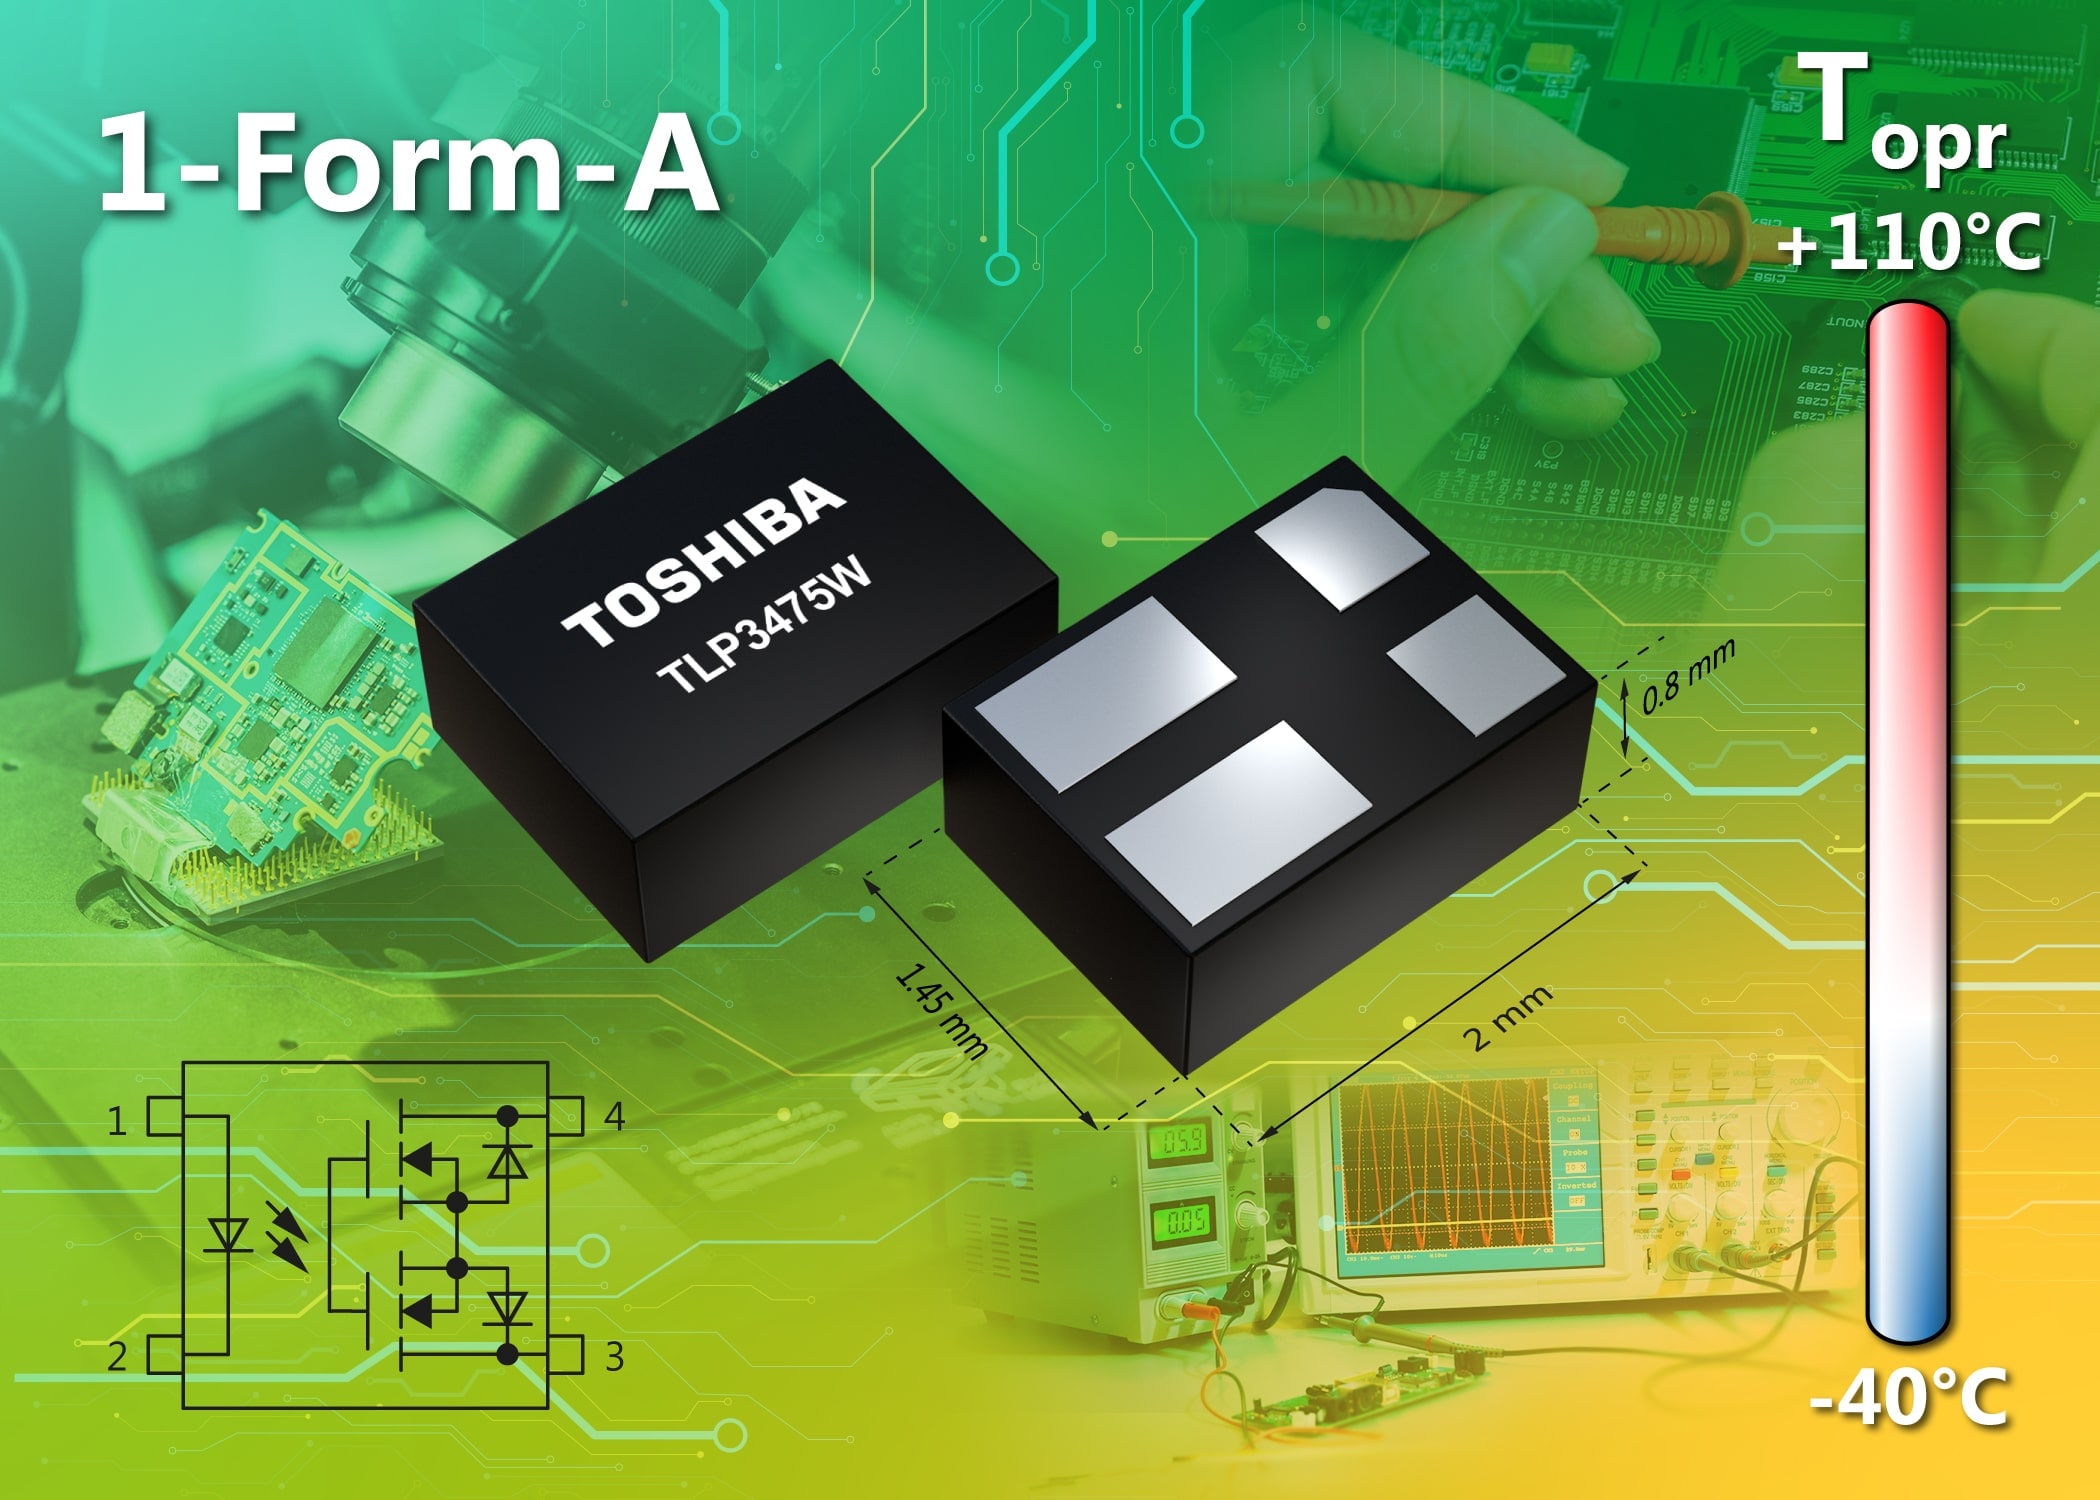 Toshiba launches a small photorelay for high-frequency signal switching